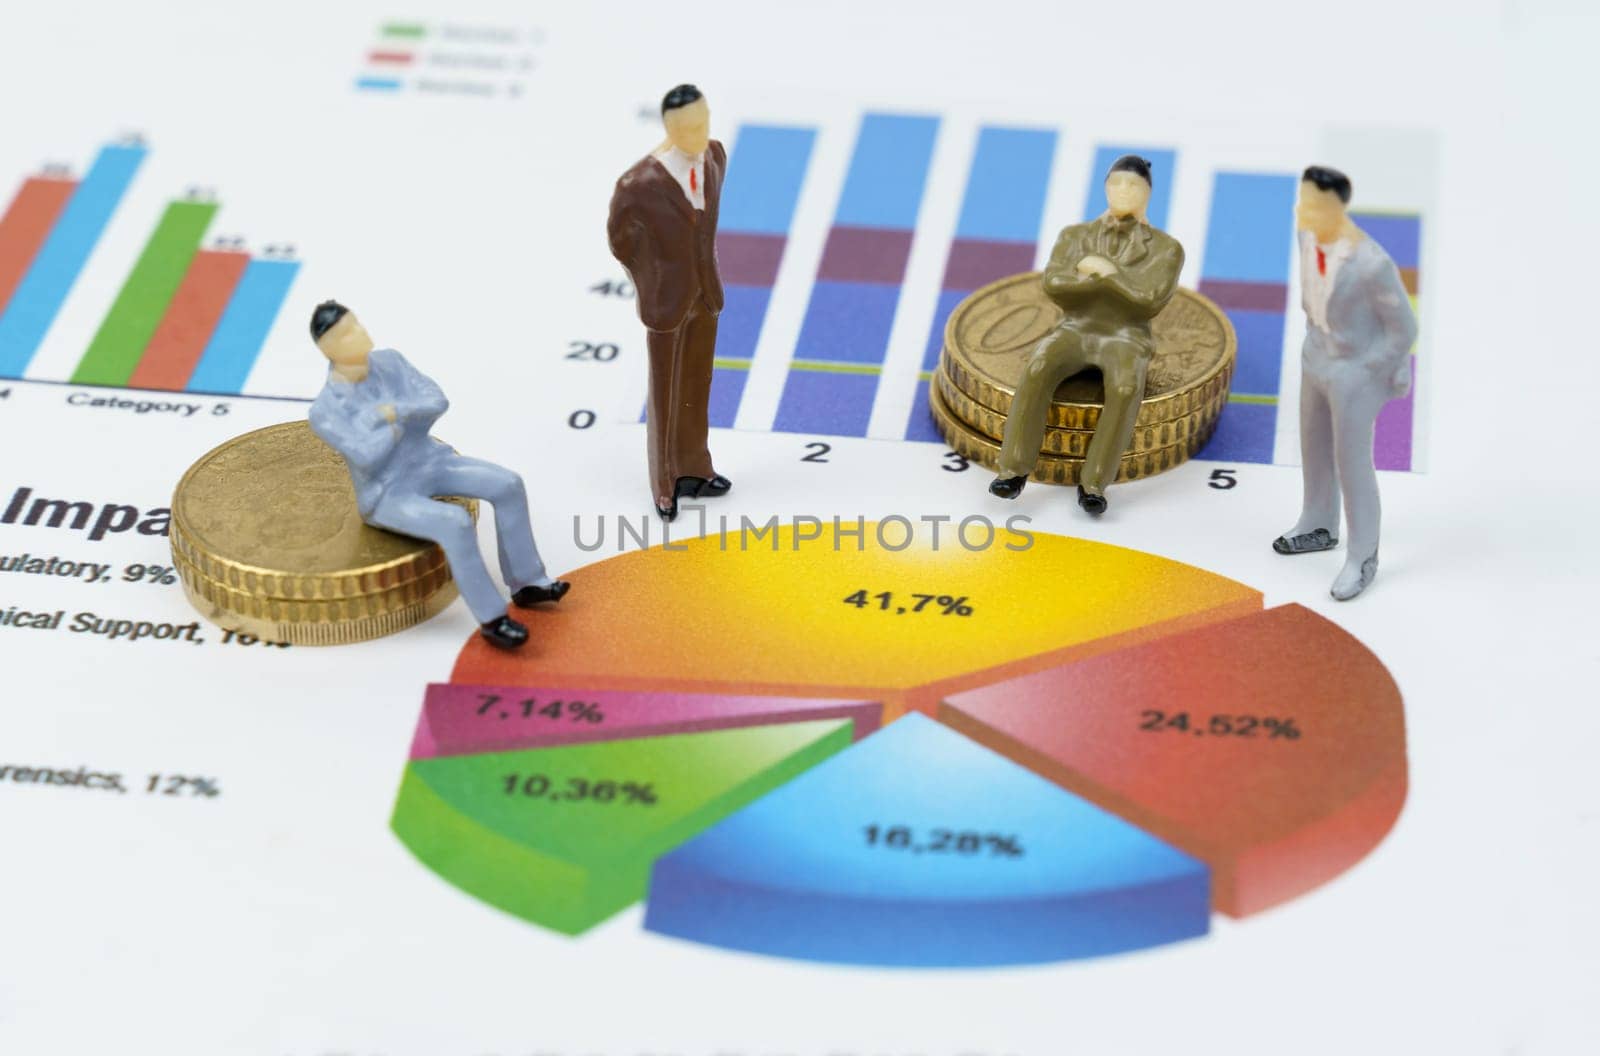 On financial charts there are miniature figures of businessmen, they sit on coins. Review the chart. by Sd28DimoN_1976